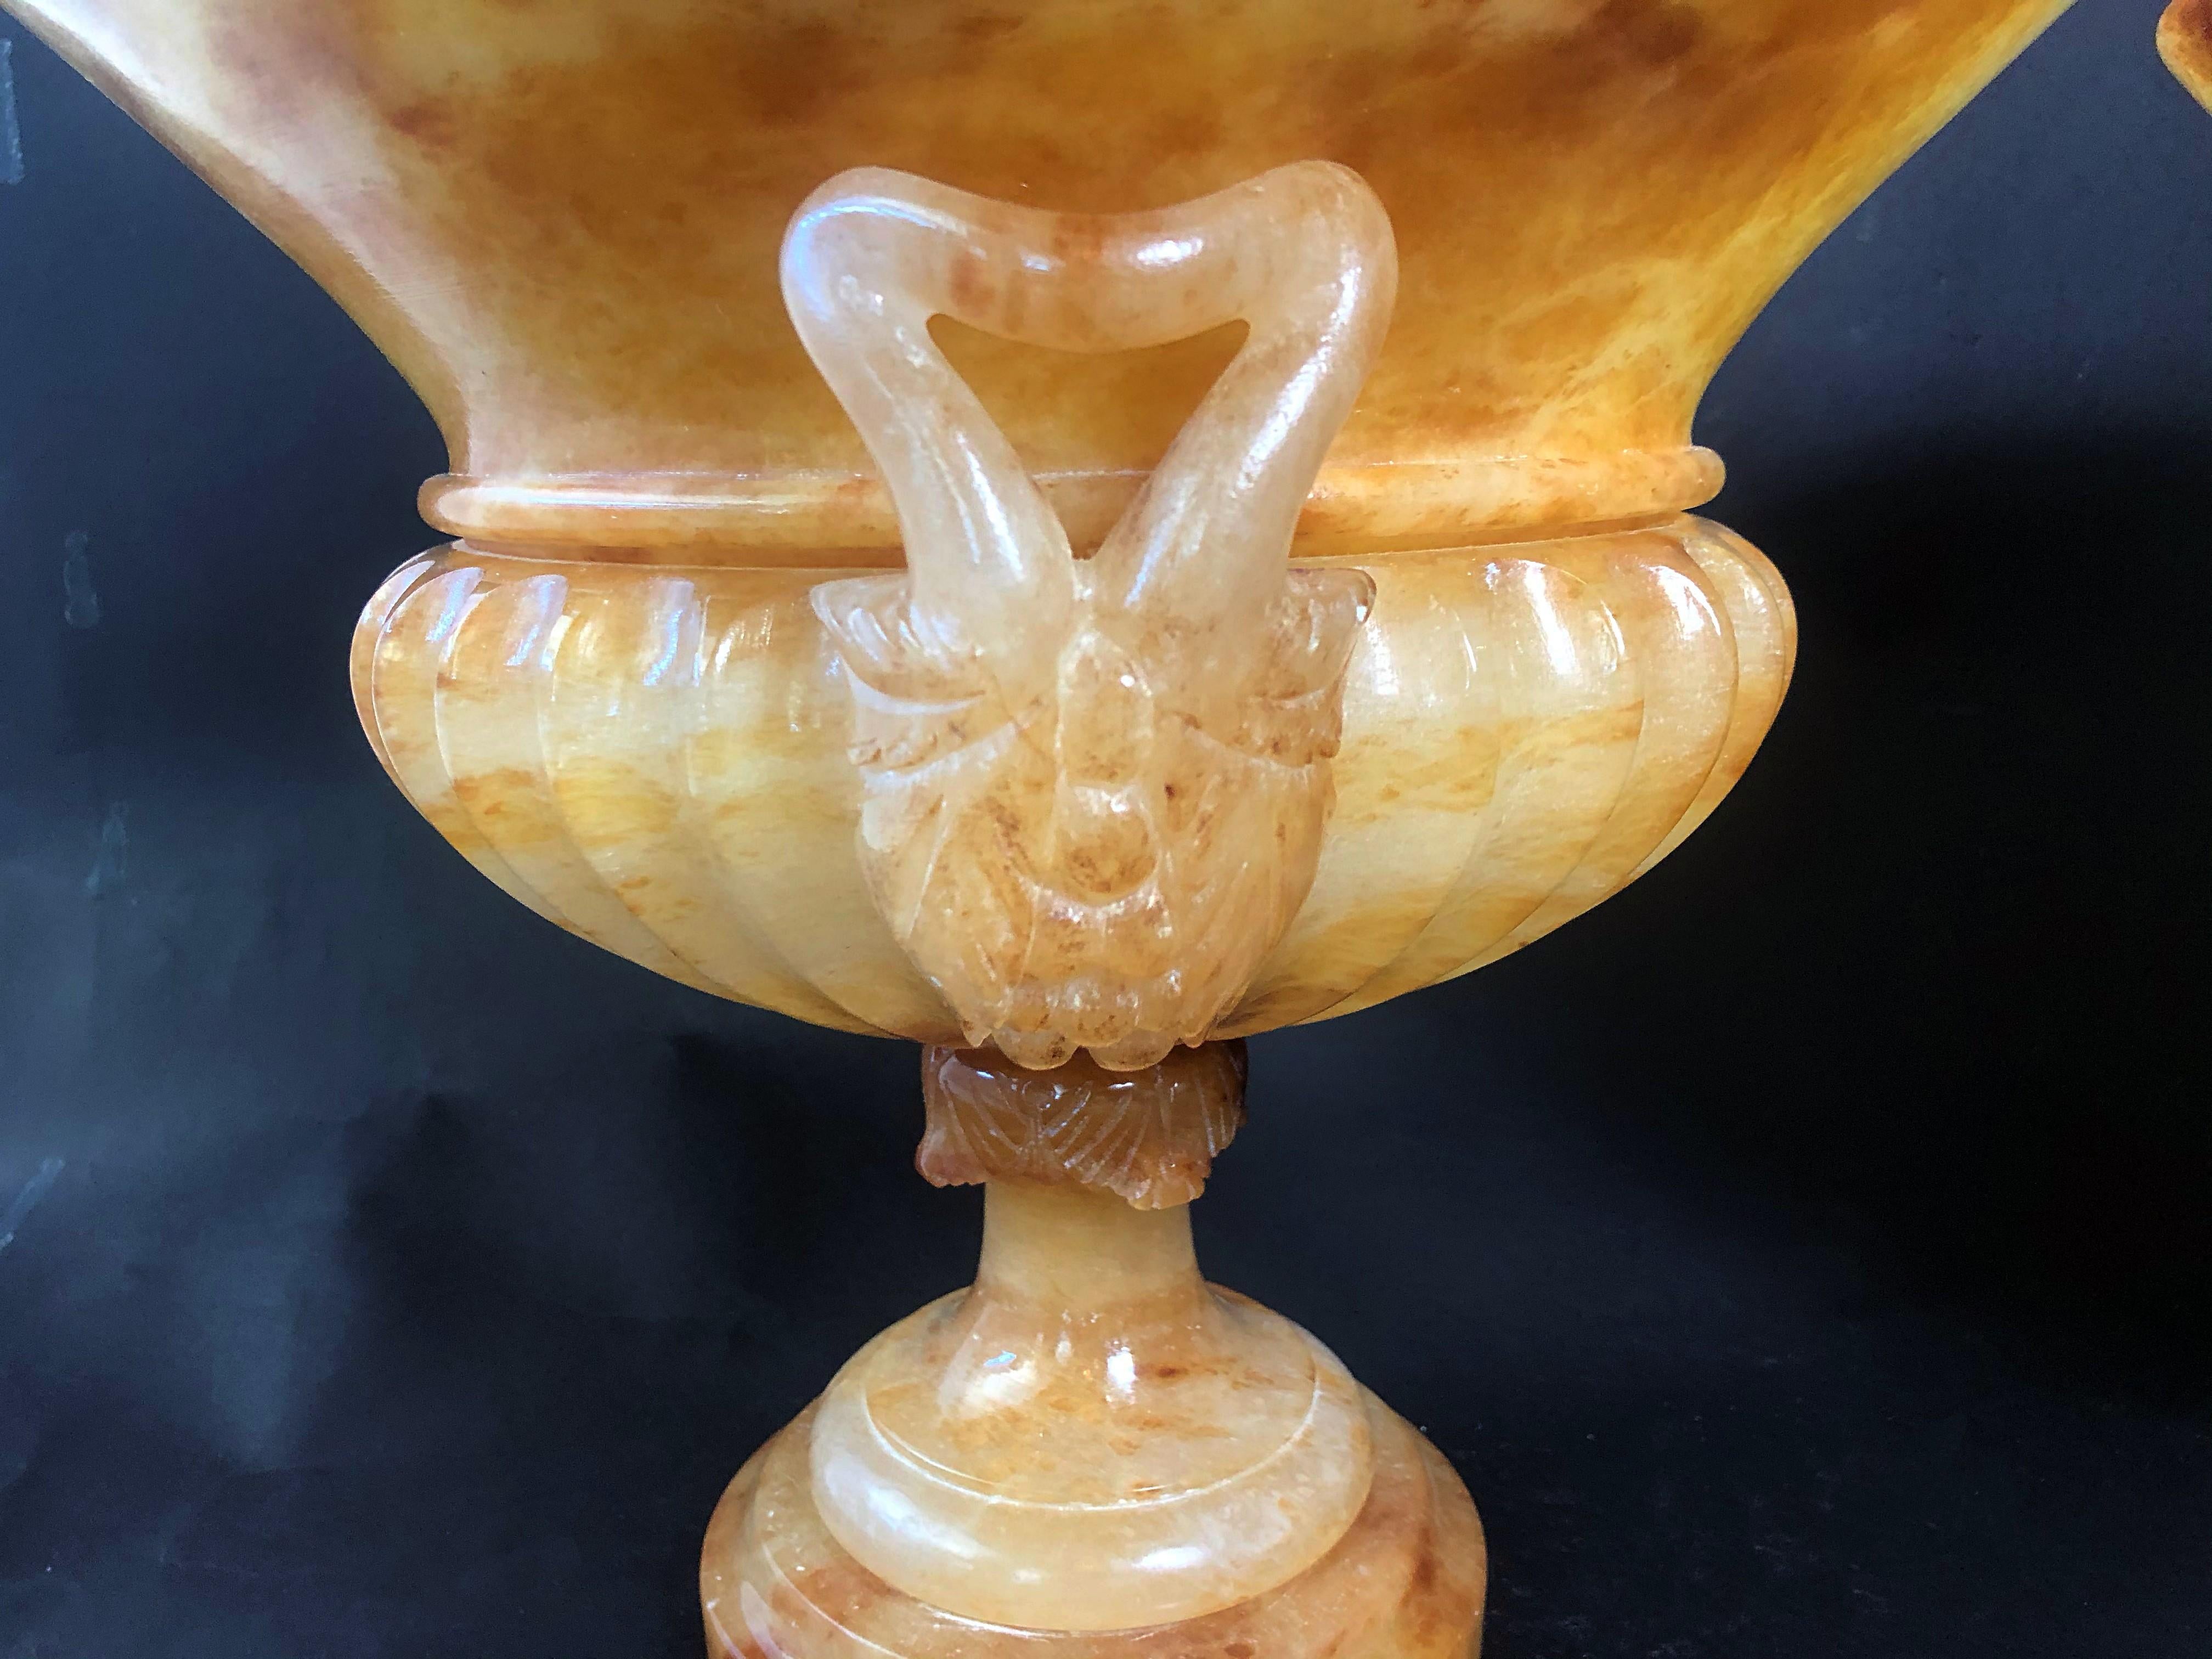 Pair of Italian Neoclassic Onyx Urns, 19th Century For Sale 2